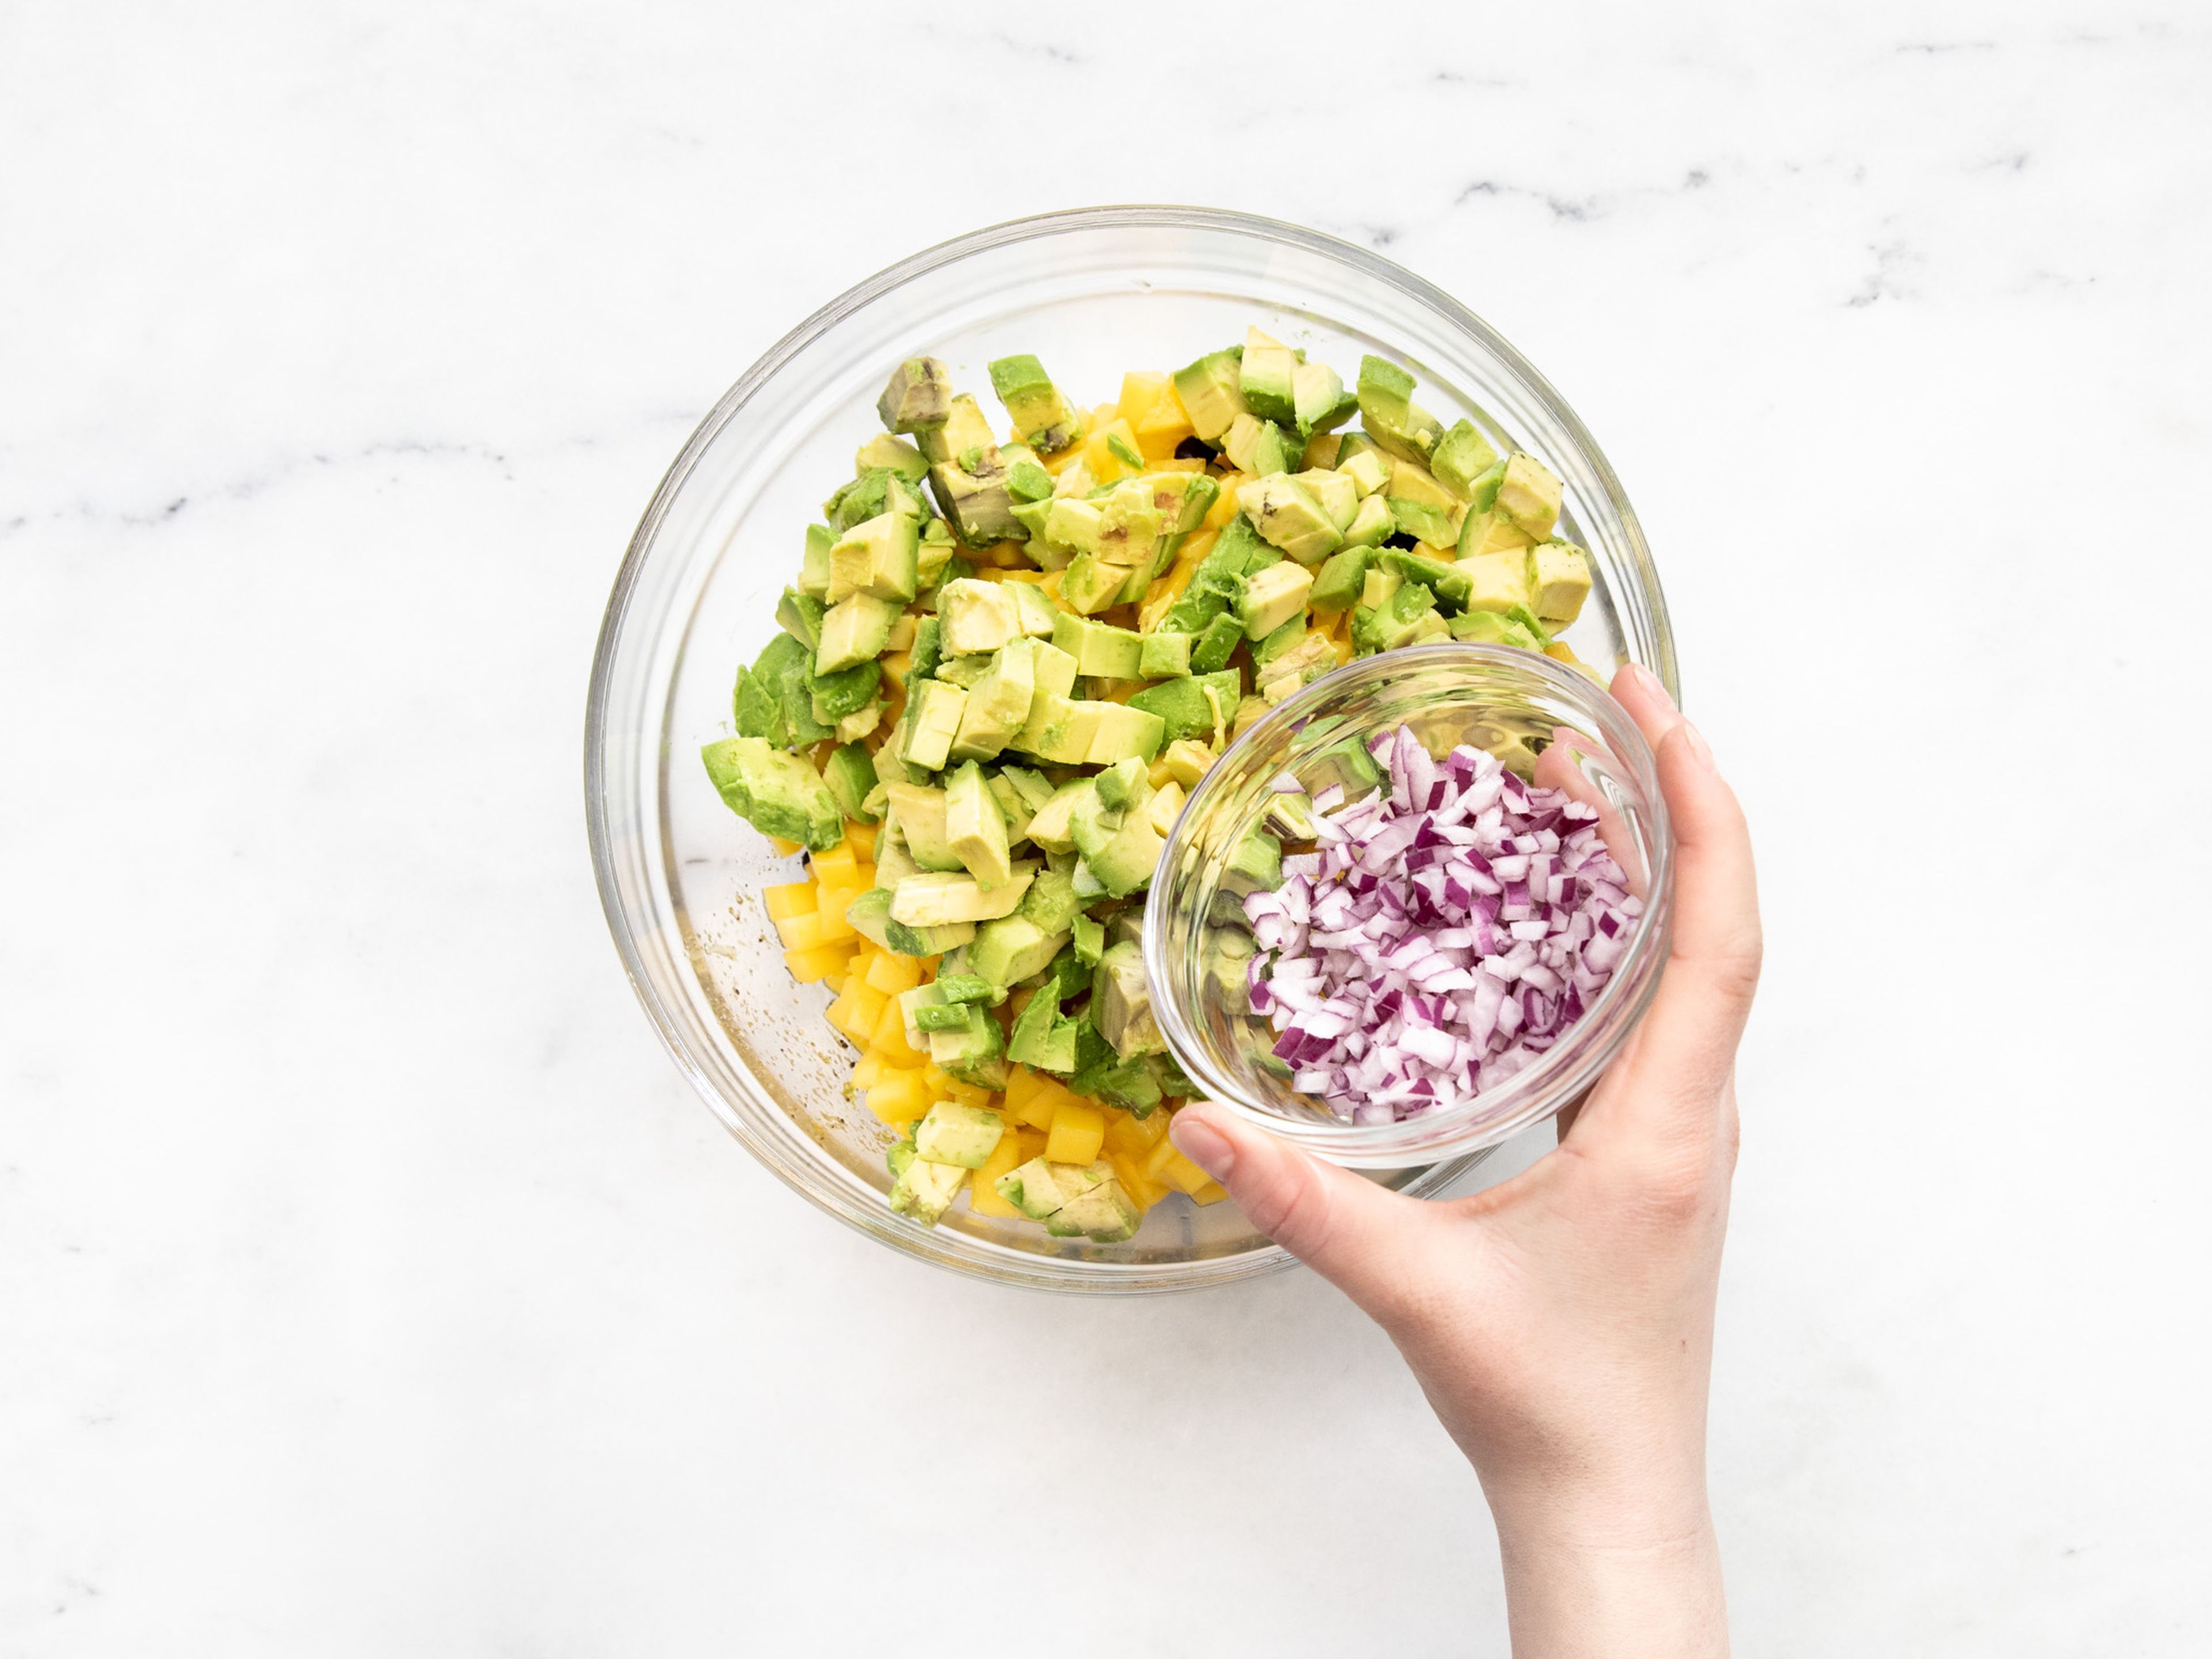 Drain the corn and black beans and add to the bowl with the lime dressing. Mix together with the avocados, mango, and red onion. Serve with tortilla chips, and cilantro, and sprinkle with our AVOCADO DREAMS seasoning if liking. Enjoy!